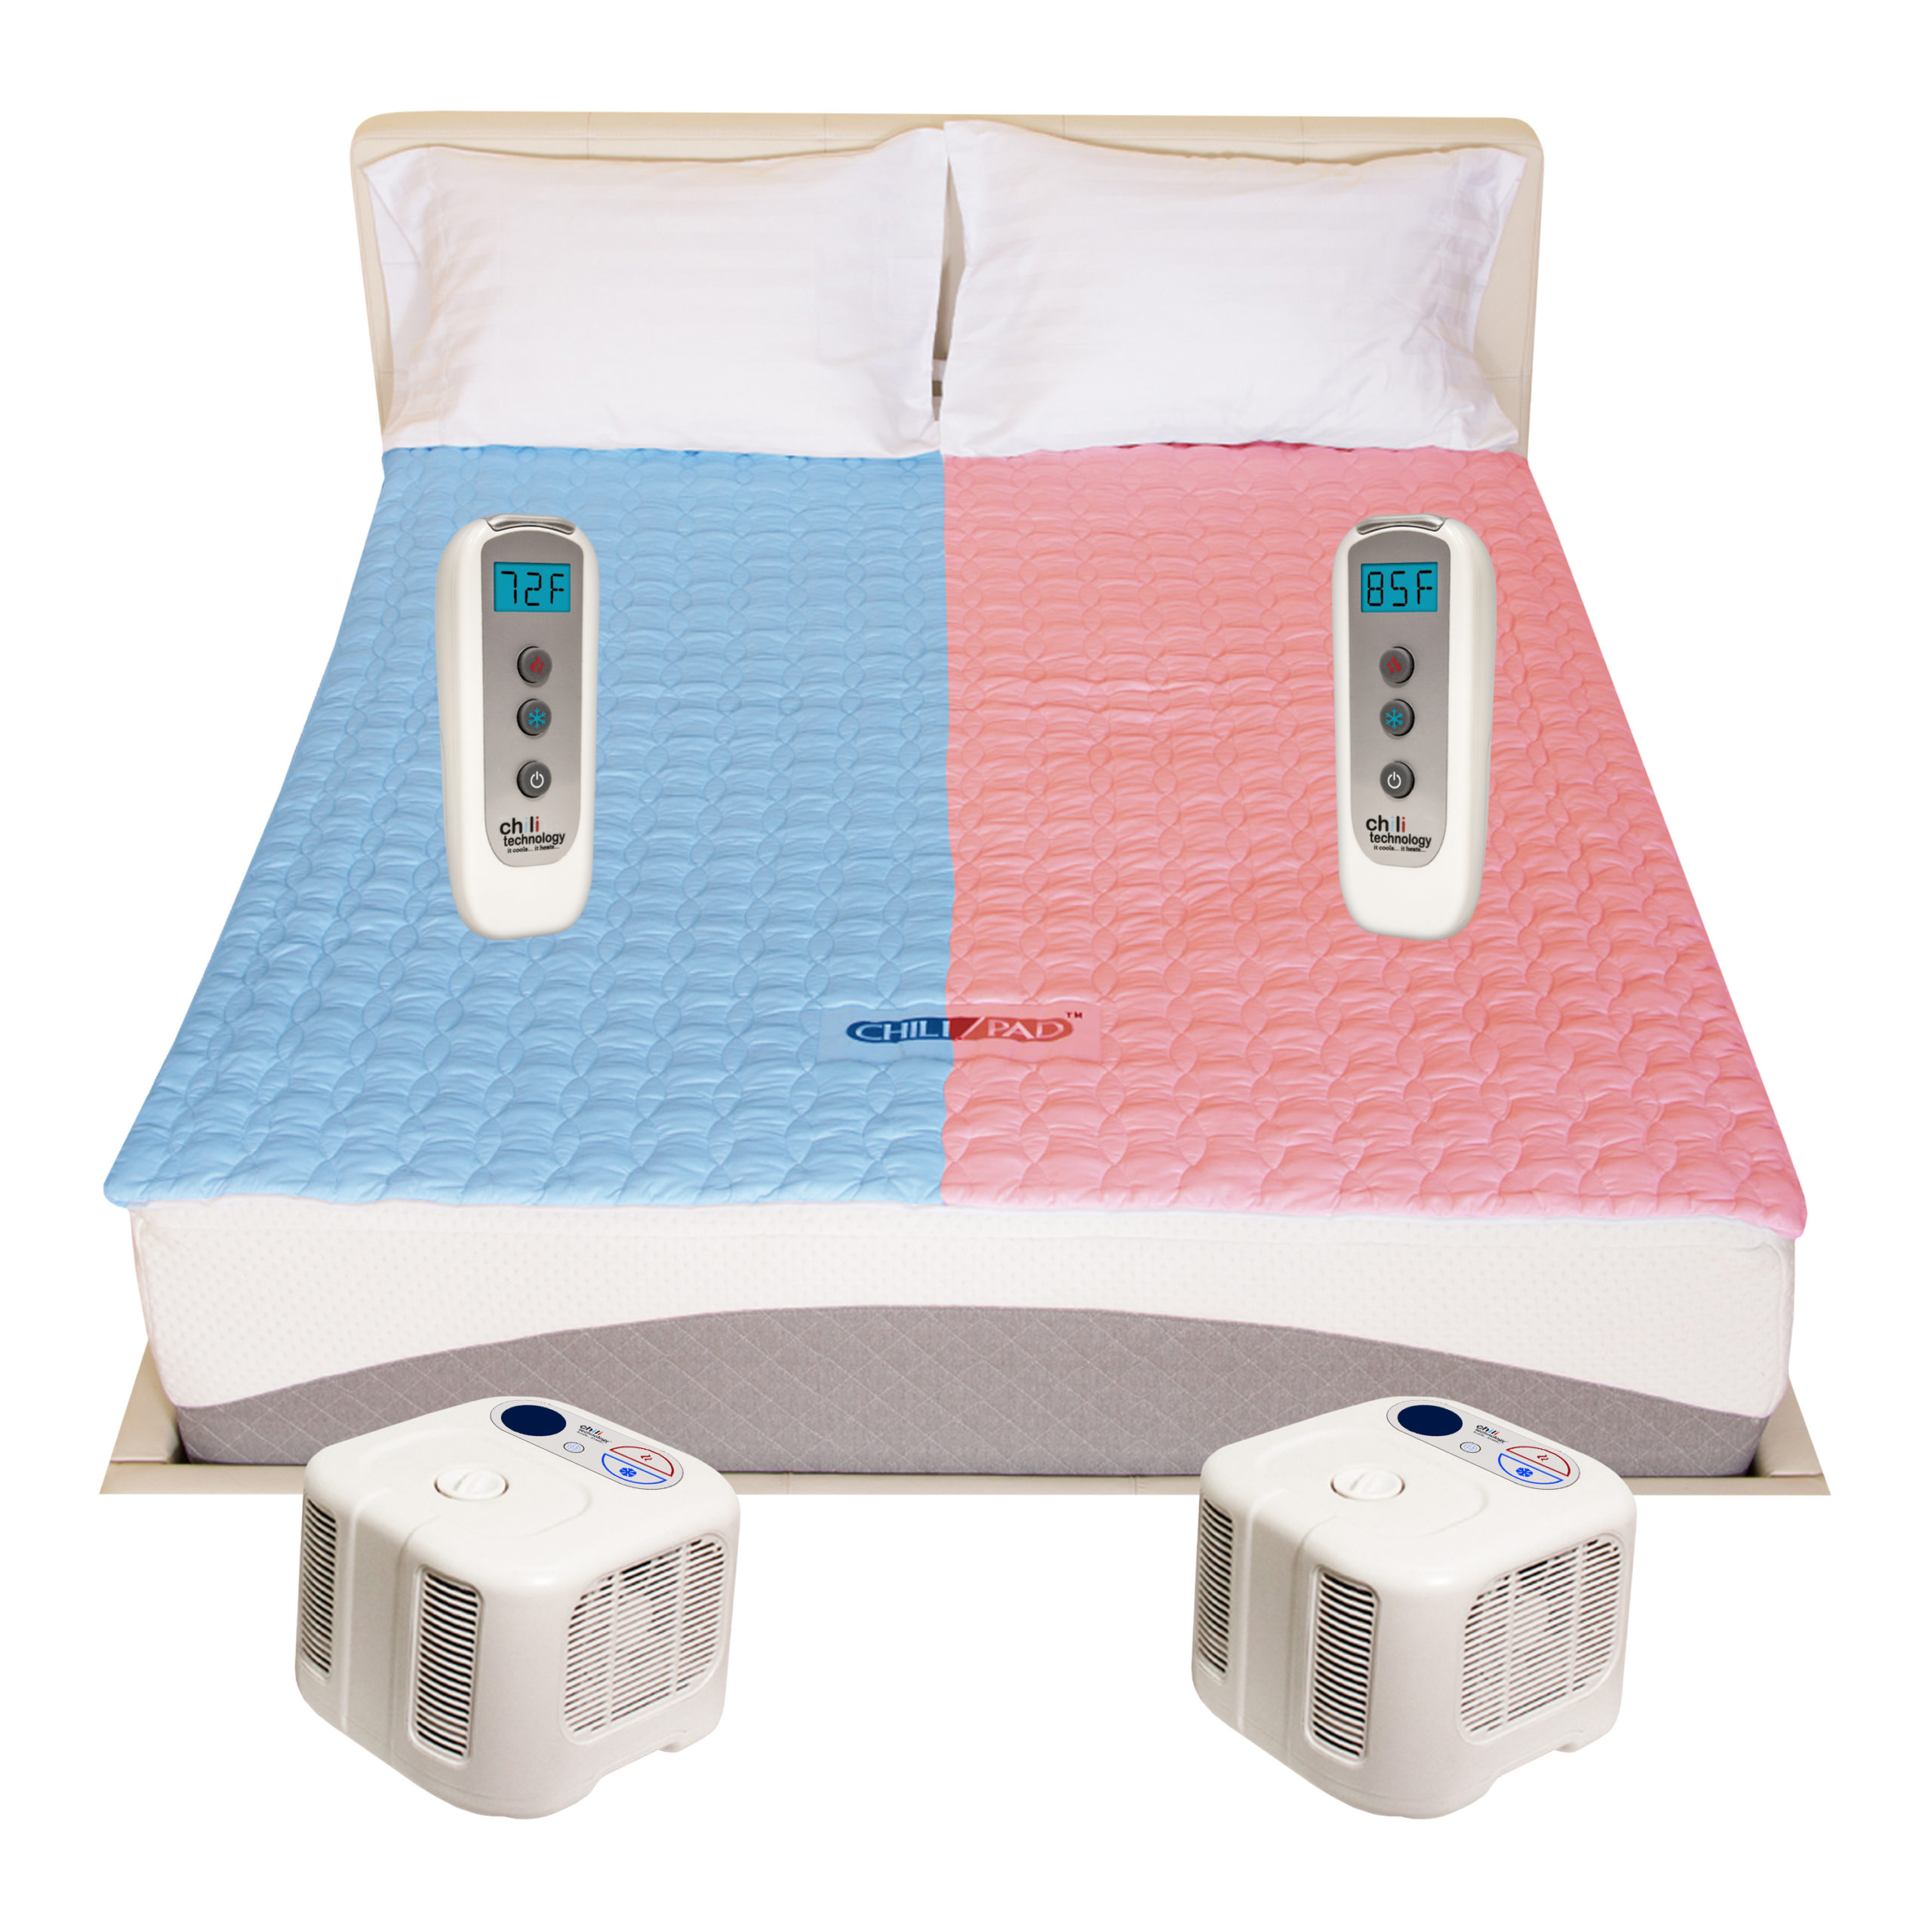 Id.me Nurse - Chilipad|Temperature|Mattress|Cube|Sleep|Bed|Water|System|Pad|Ooler|Control|Unit|Night|Bedjet|Technology|Side|Air|Product|Review|Body|Time|Degrees|Noise|Price|Pod|Tubes|Heat|Device|Cooling|Room|King|App|Features|Size|Cover|Sleepers|Sheets|Energy|Warranty|Quality|Mattress Pad|Control Unit|Cube Sleep System|Sleep Pod|Distilled Water|Remote Control|Sleep System|Desired Temperature|Water Tank|Chilipad Cube|Chili Technology|Deep Sleep|Pro Cover|Ooler Sleep System|Hydrogen Peroxide|Cool Mesh|Sleep Temperature|Fitted Sheet|Pod Pro|Sleep Quality|Smartphone App|Sleep Systems|Chilipad Sleep System|New Mattress|Sleep Trial|Full Refund|Mattress Topper|Body Heat|Air Flow|Chilipad Review